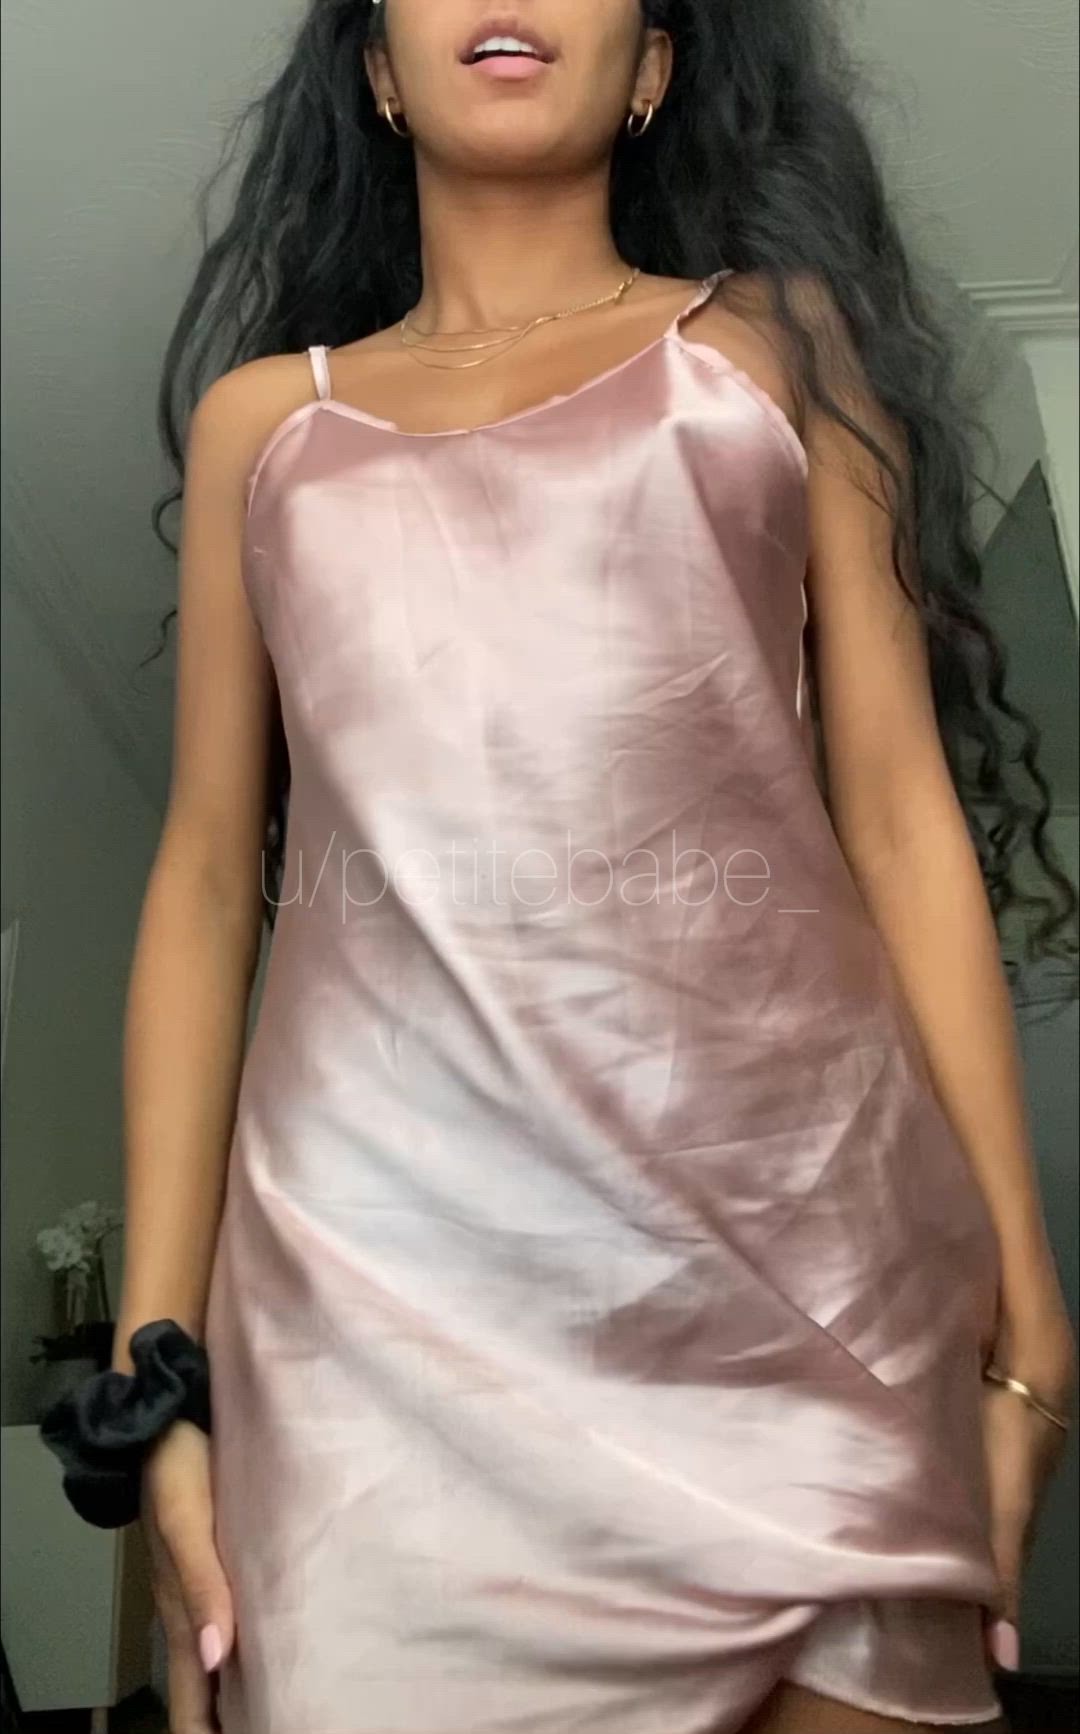 Petite porn video with onlyfans model Ella <strong>@petitebabexo</strong>